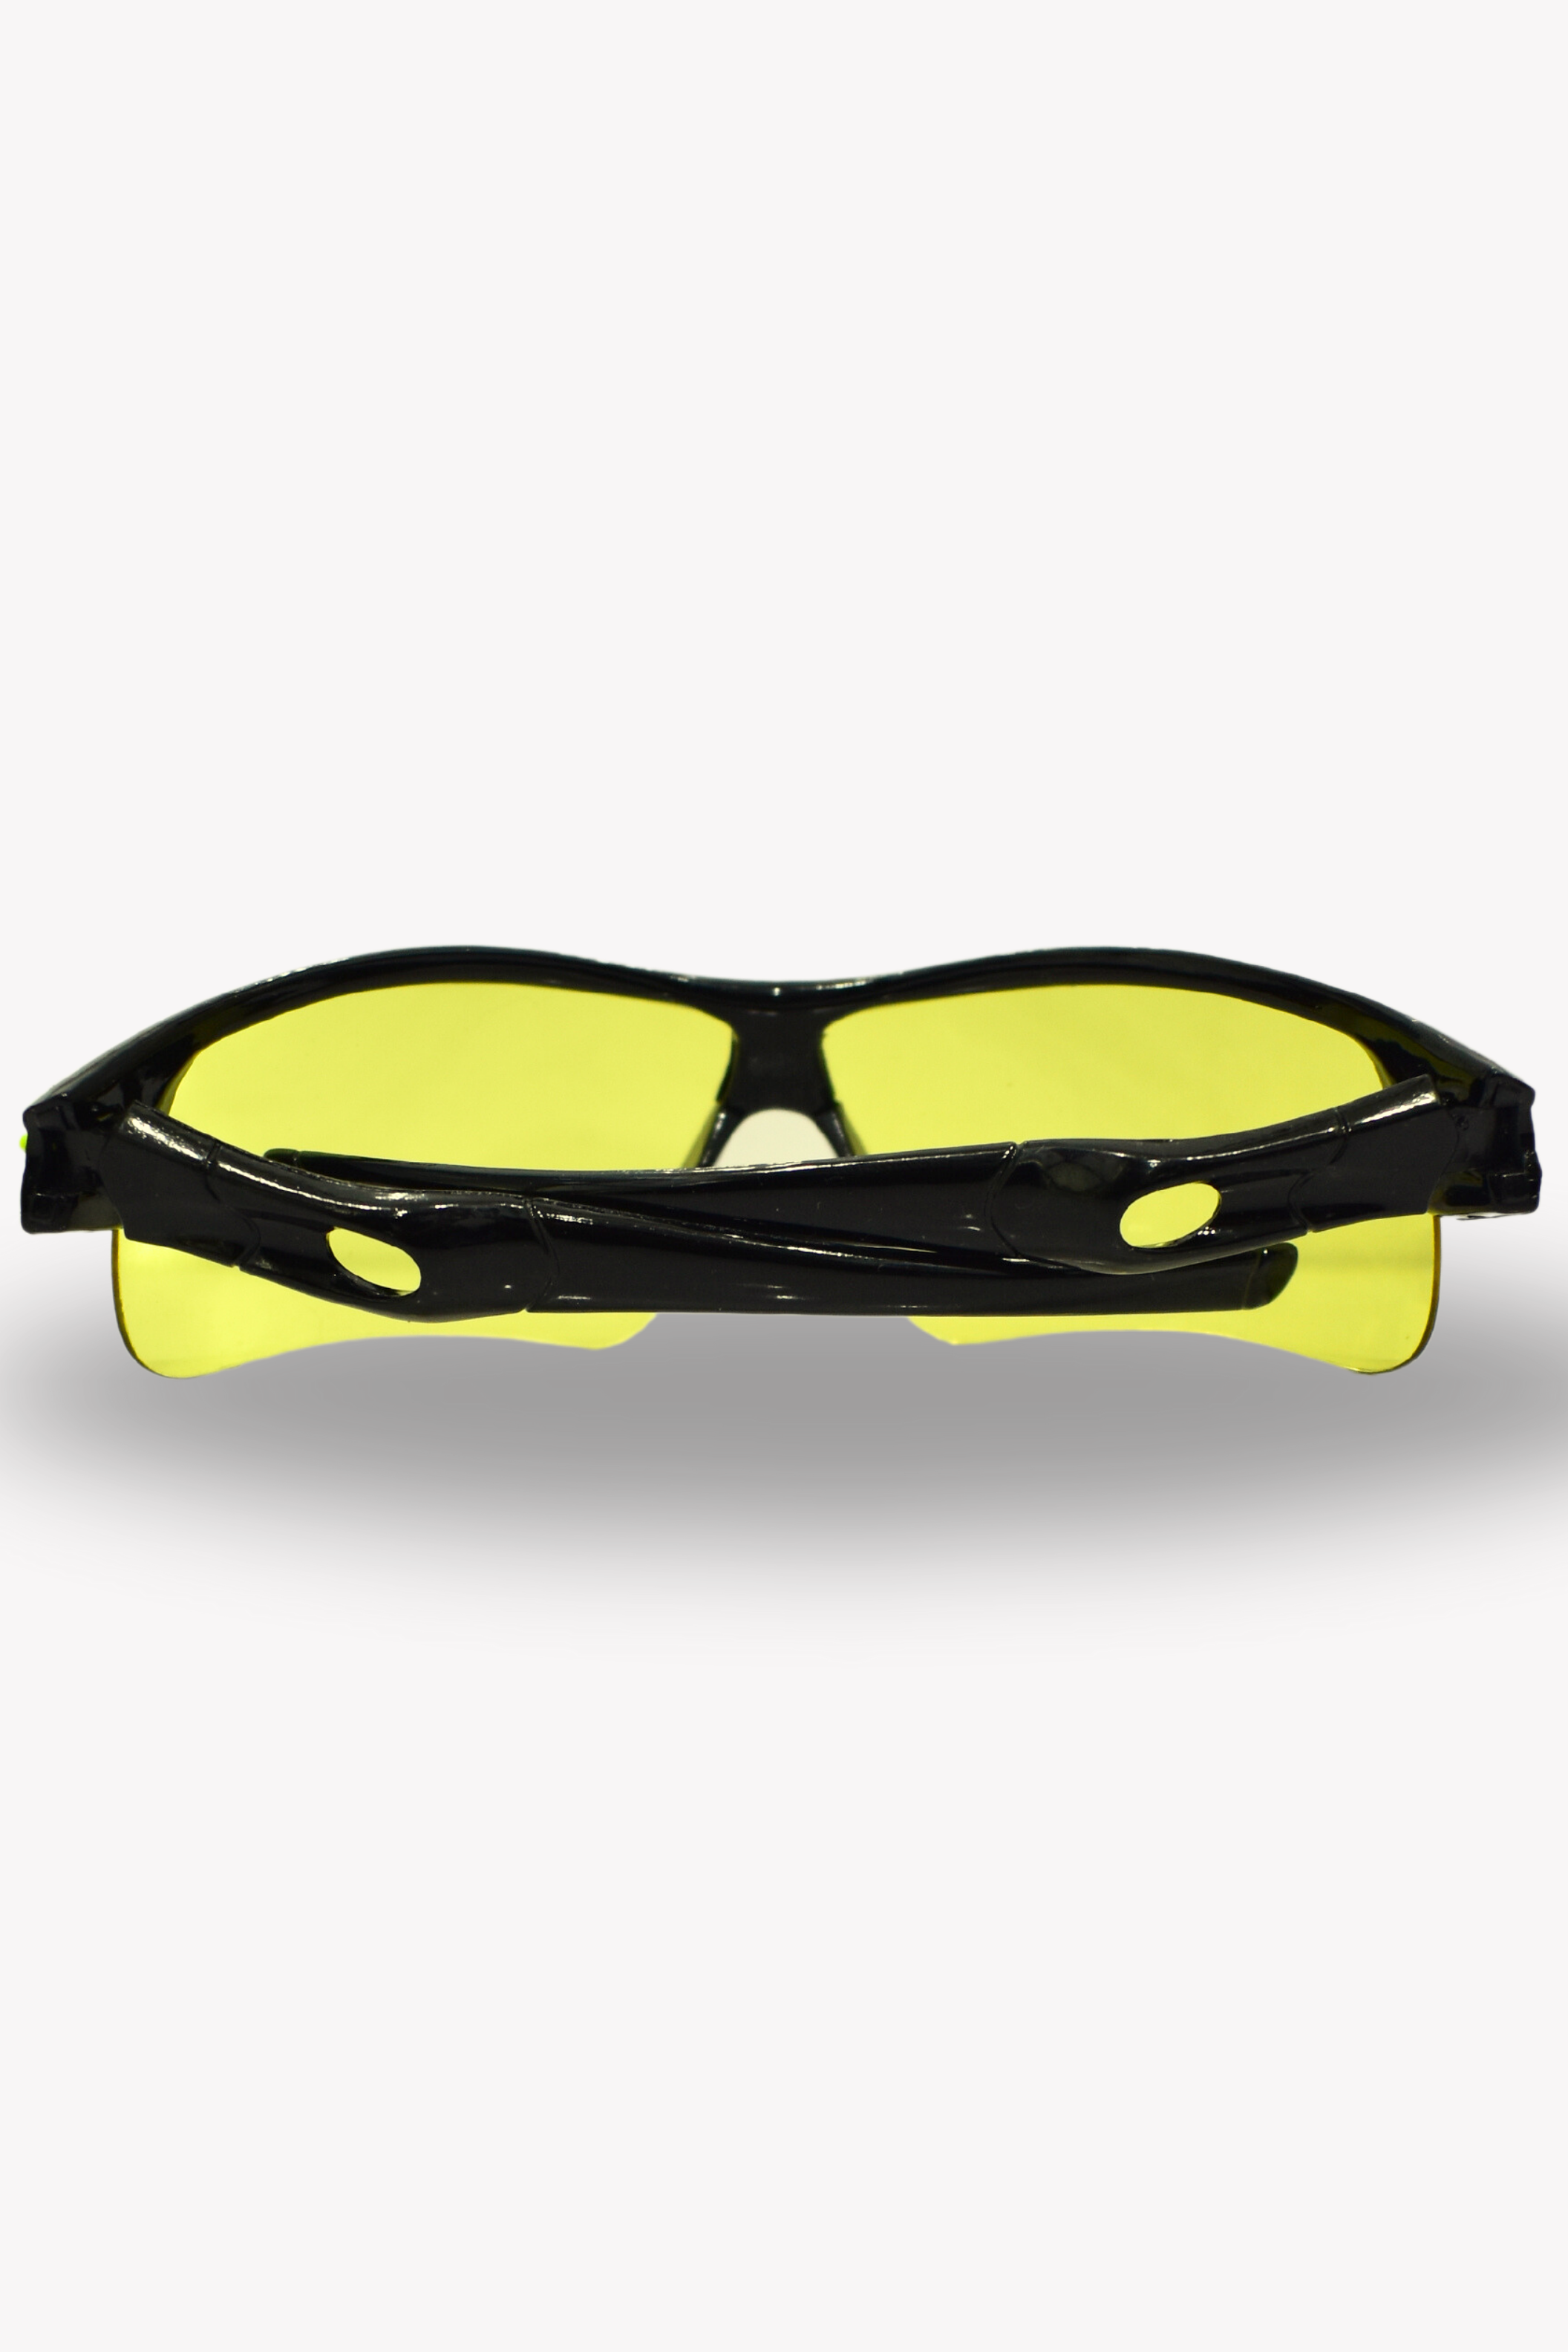 Oakley Adult Sun Glasses black and yellow